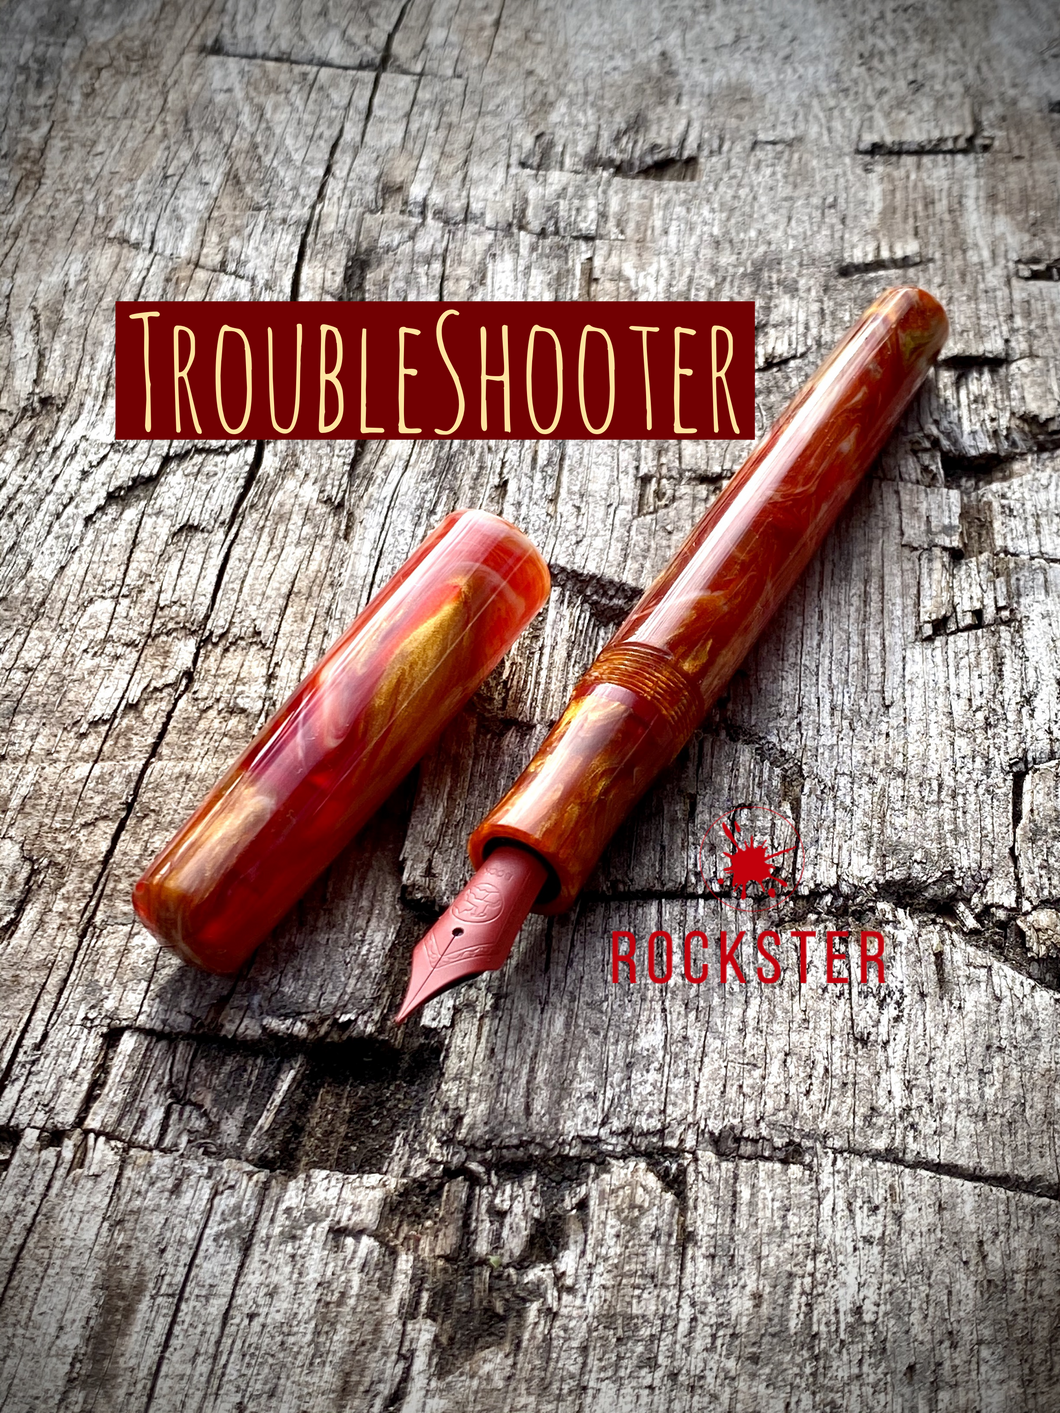 TroubleShooter 1313 in Rockster Volcano